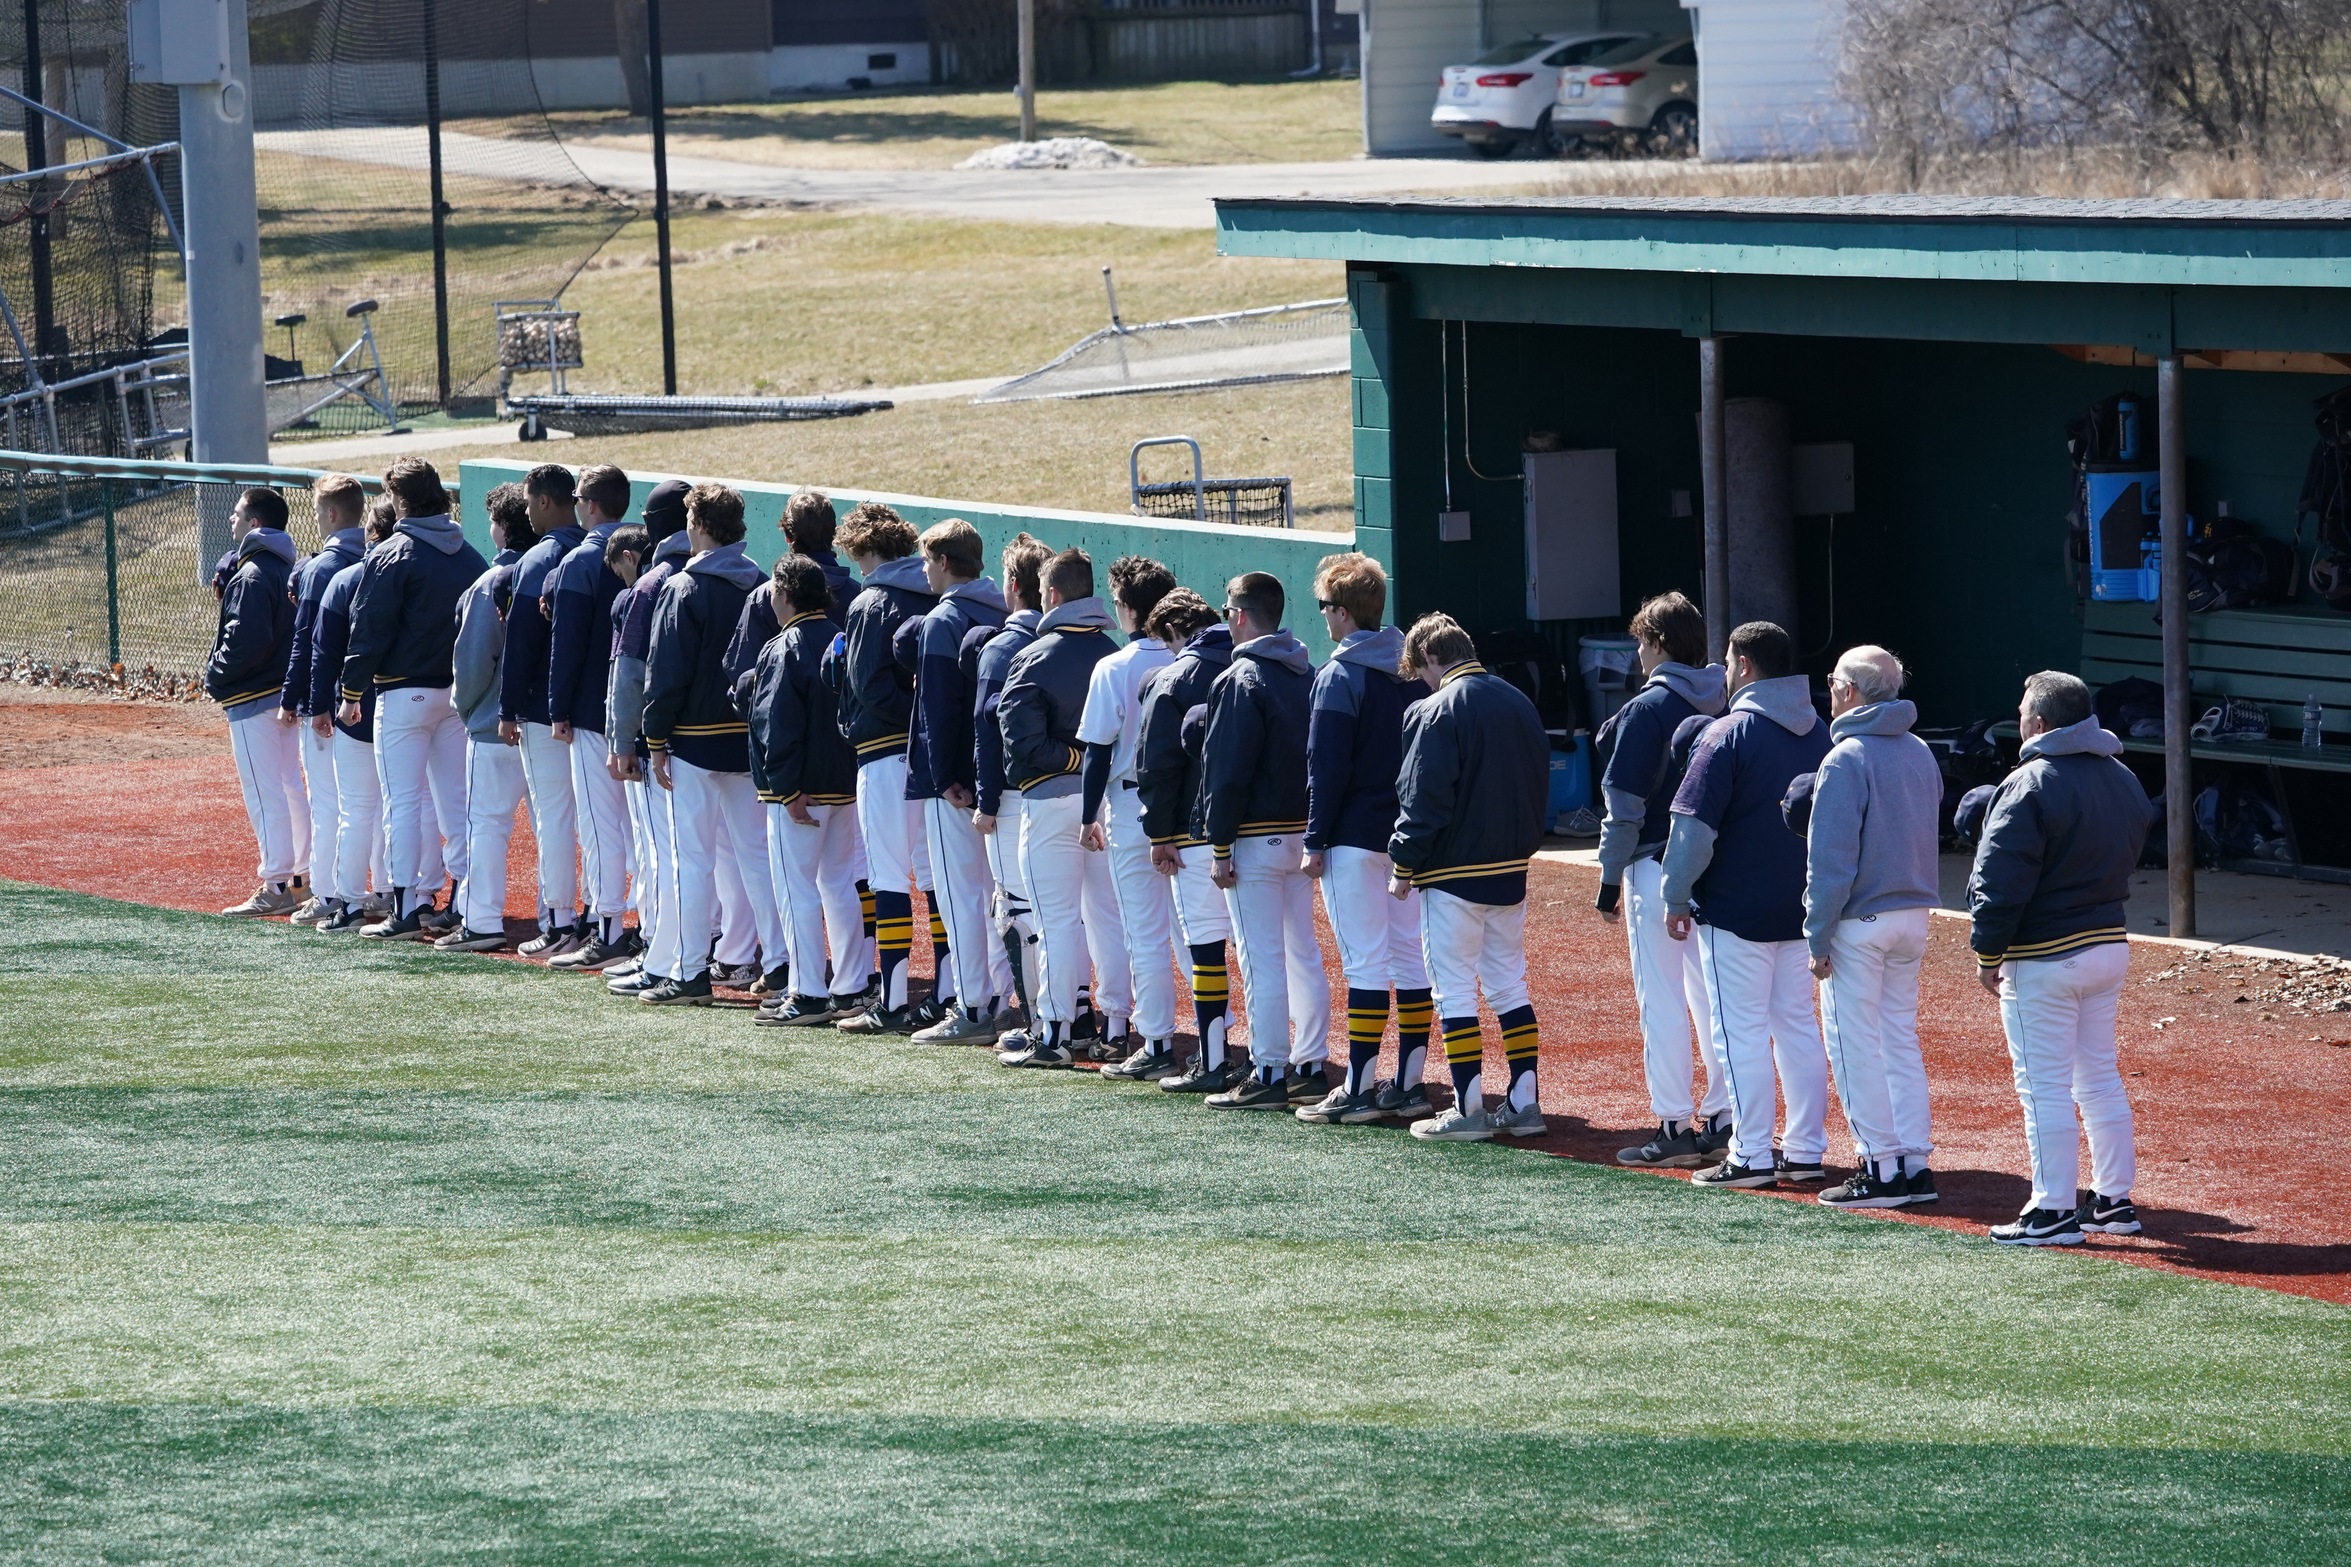 Baseball drops Pair in Day 2 Double-Header vs Indiana Tech